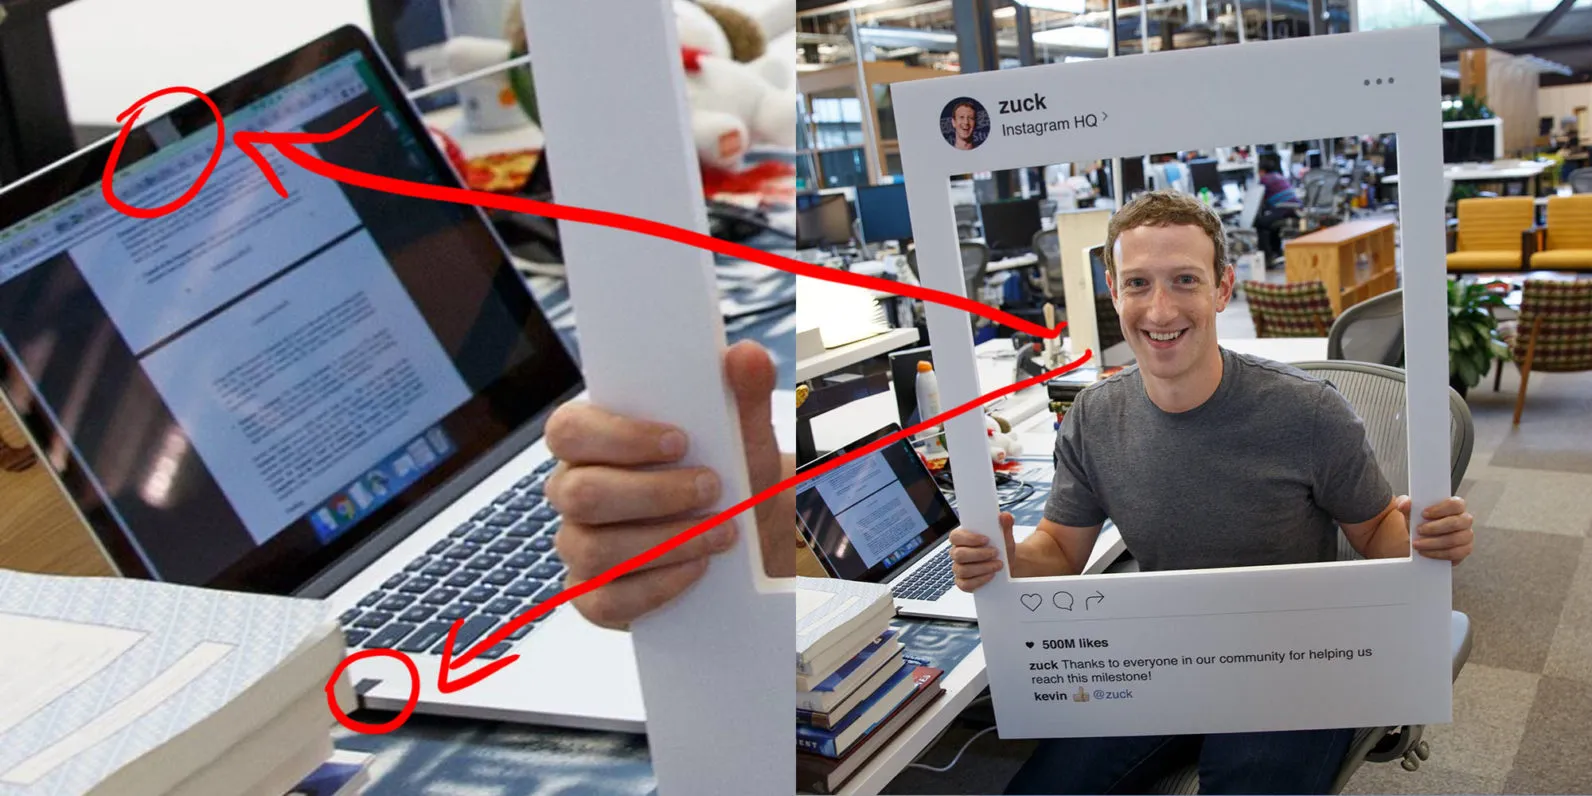 Mark Zuckerberg smiling while the camera picks up in the background a cover on his laptop webcam and microphone